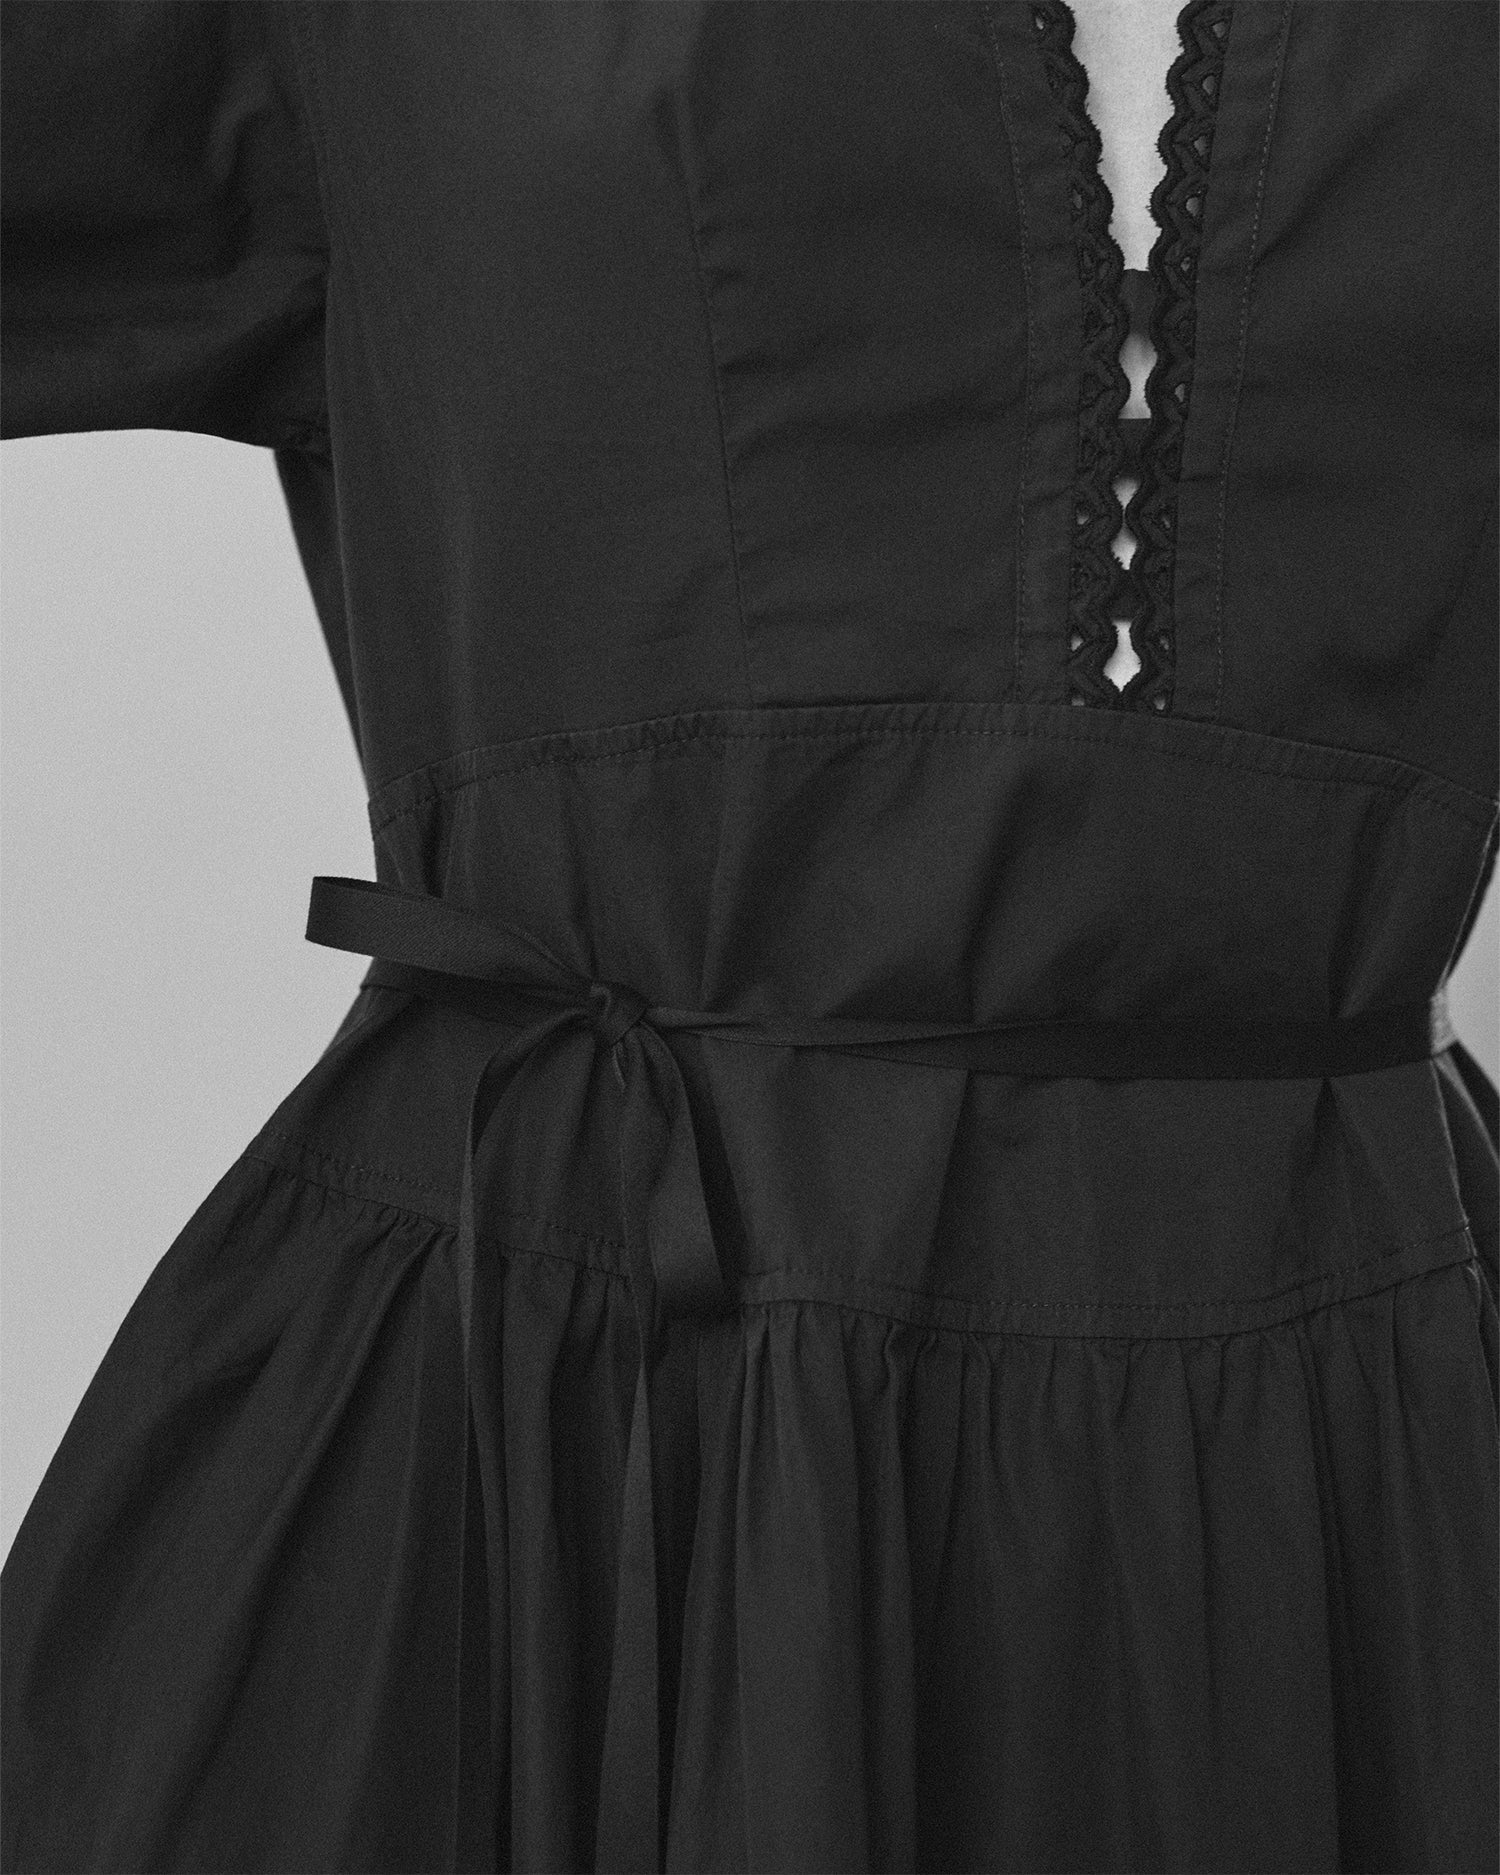 Close-up of a woman's torso wearing a black dress. Dress has a low neckline with eyelet trim and a tie belt at the waist.